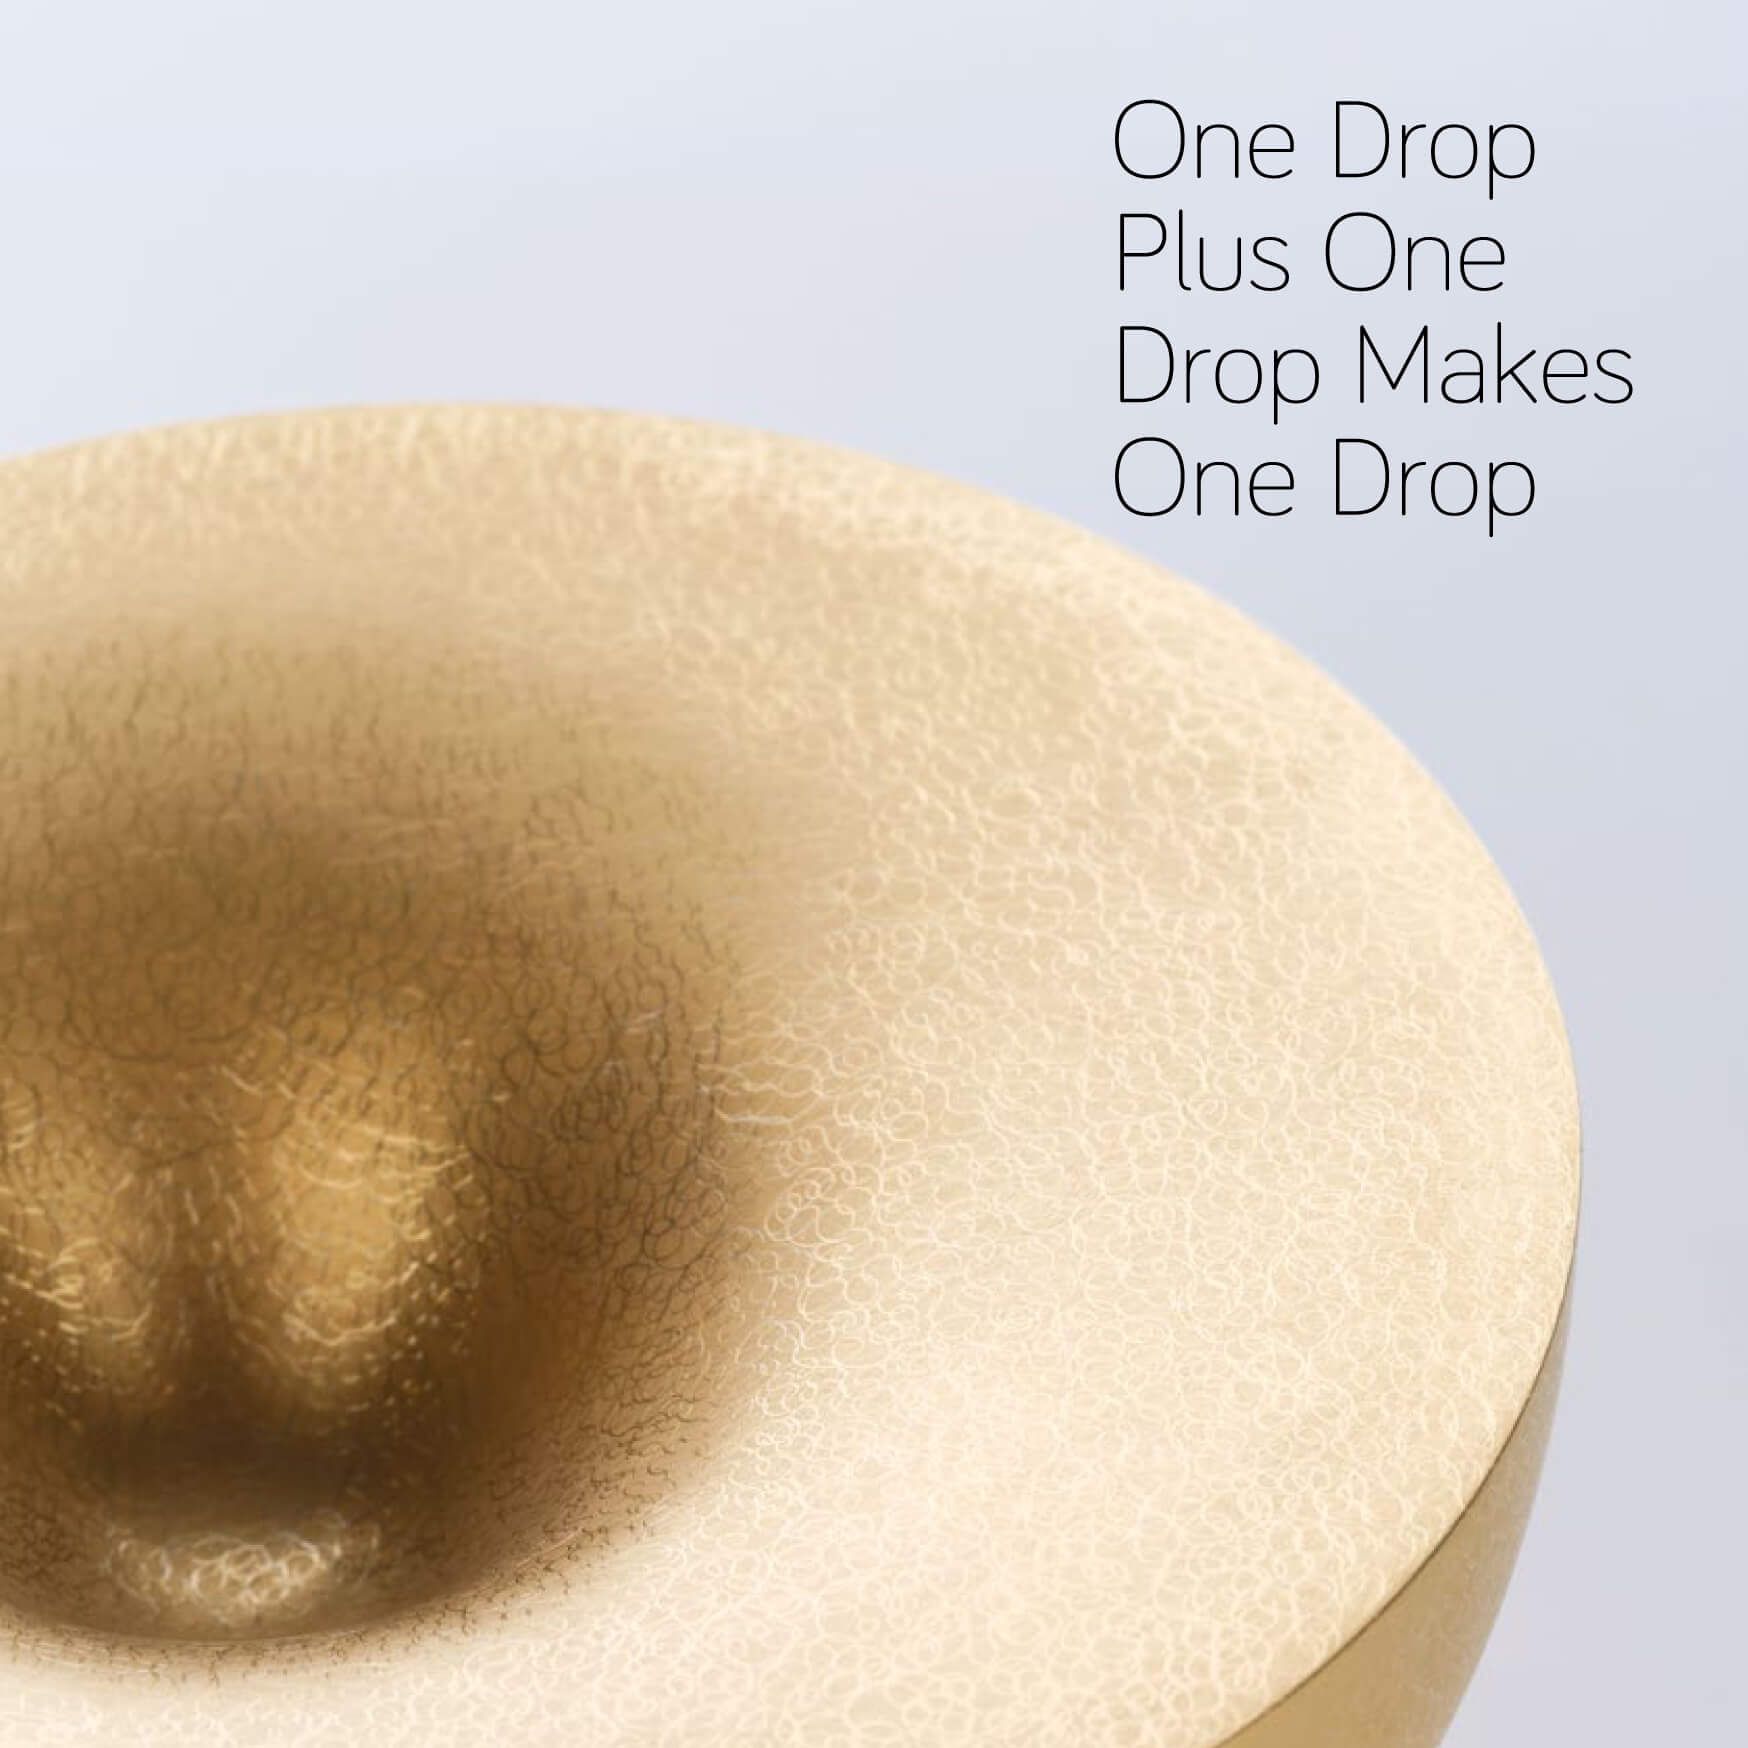 One Drop Plus One Drop Makes One Drop - Adi Toch